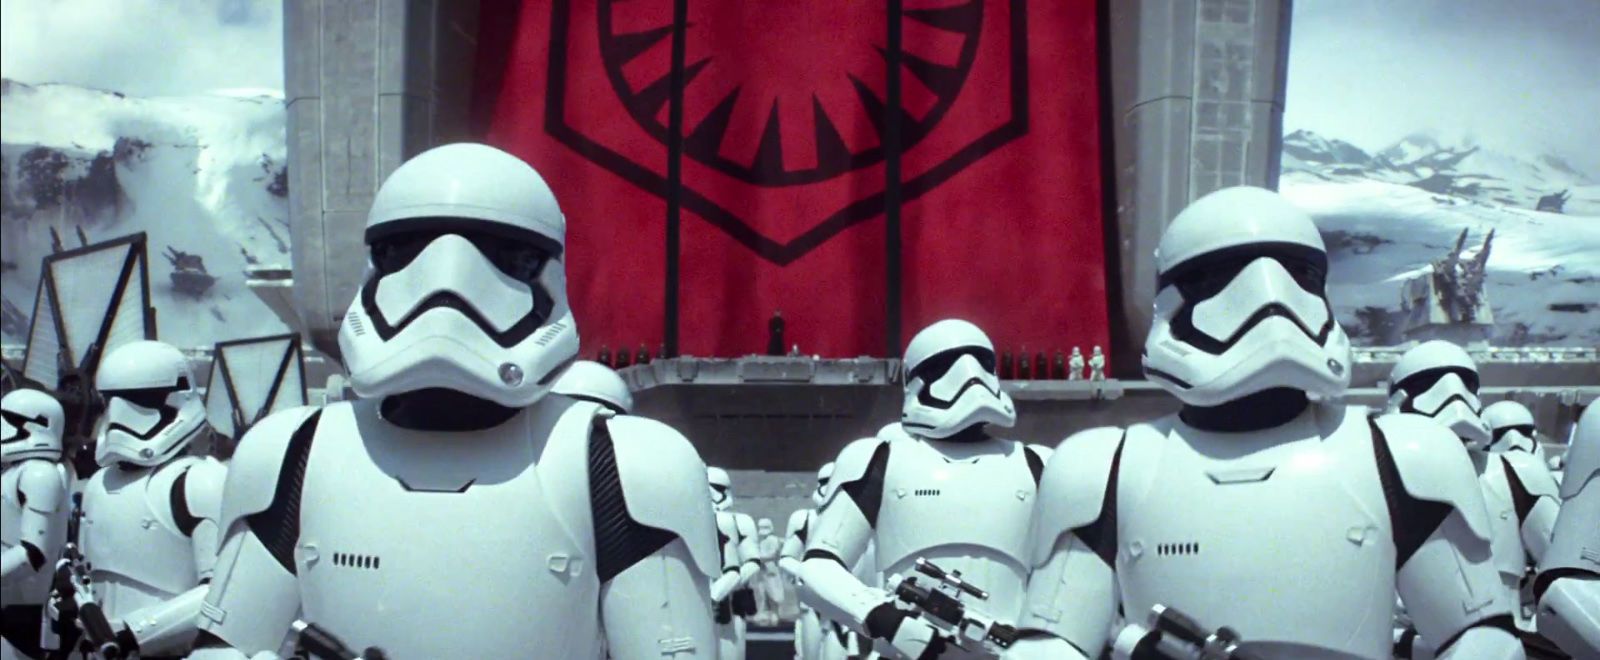 Star Wars 7 Trailer 2 - Imperial Stormtrooper Army